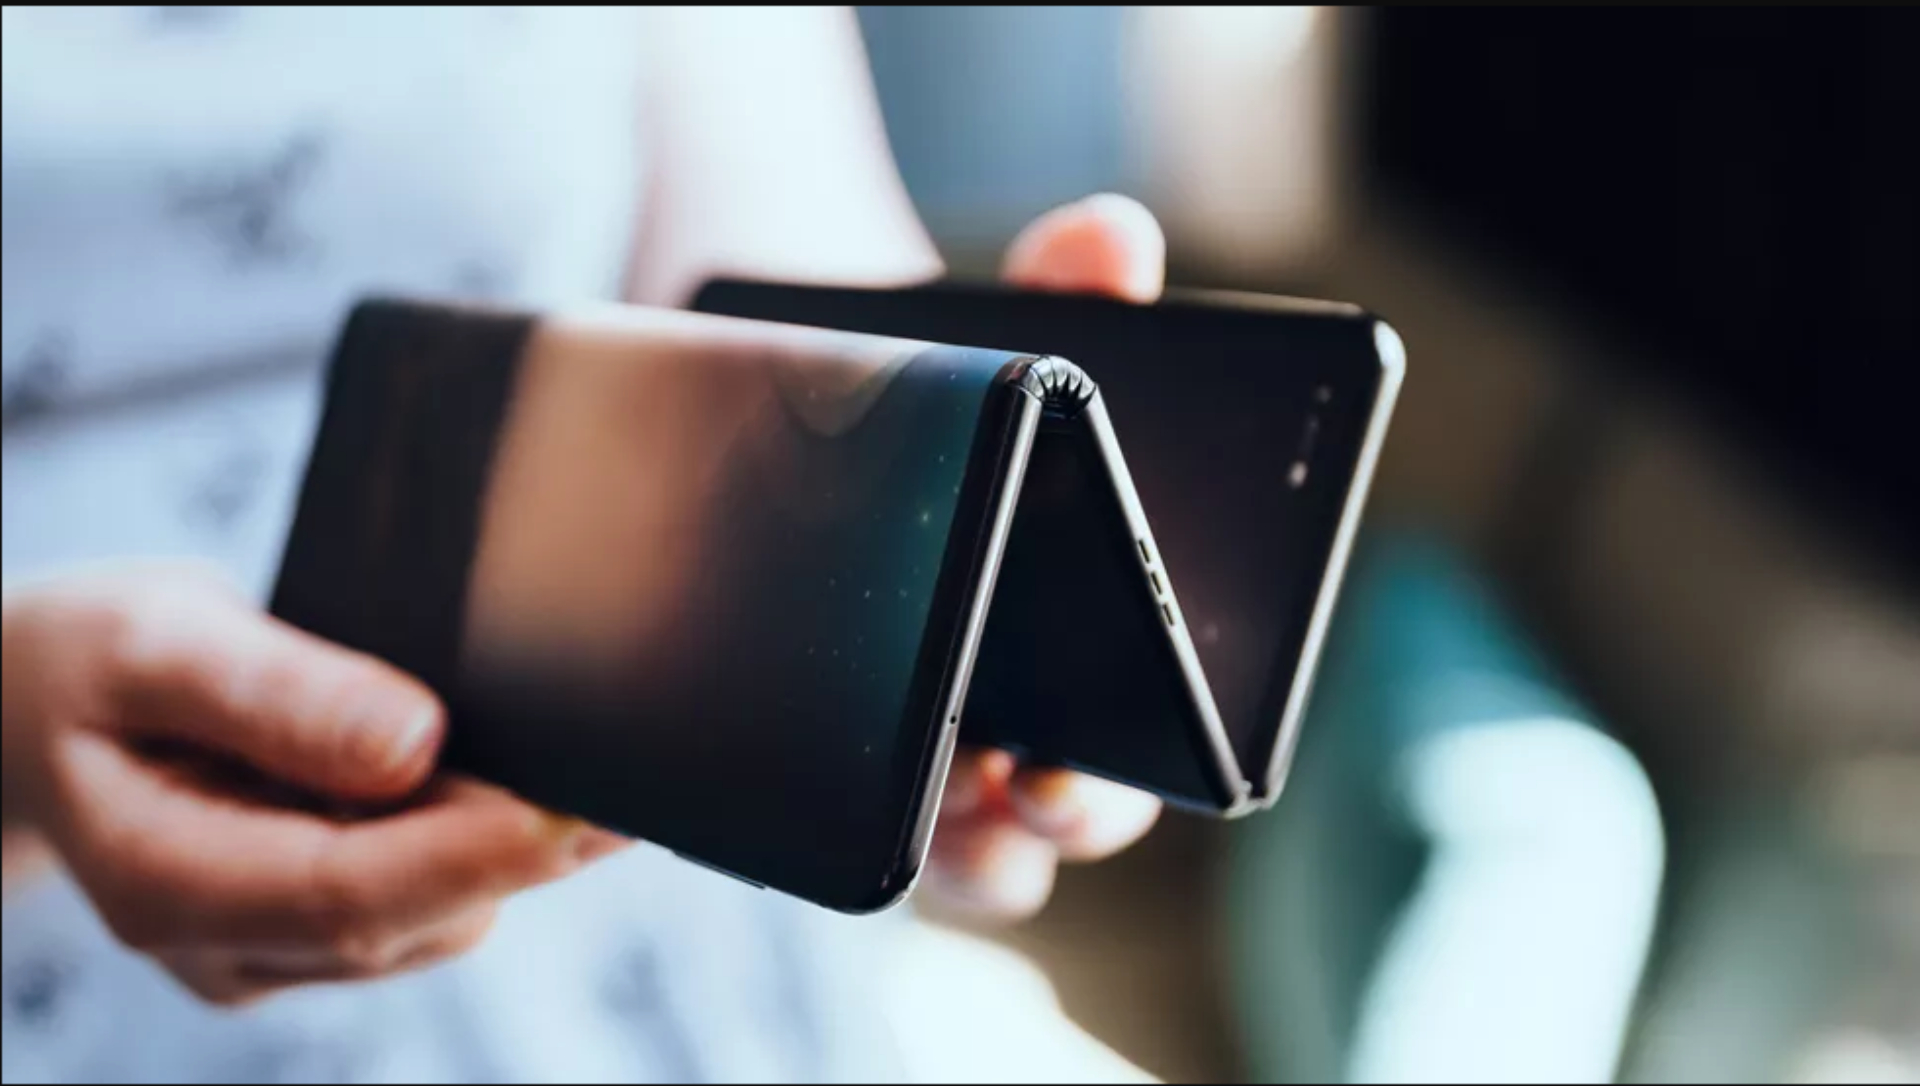 Samsung Galaxy Z Fold Tab is reportedly a triple-folding tablet coming next year